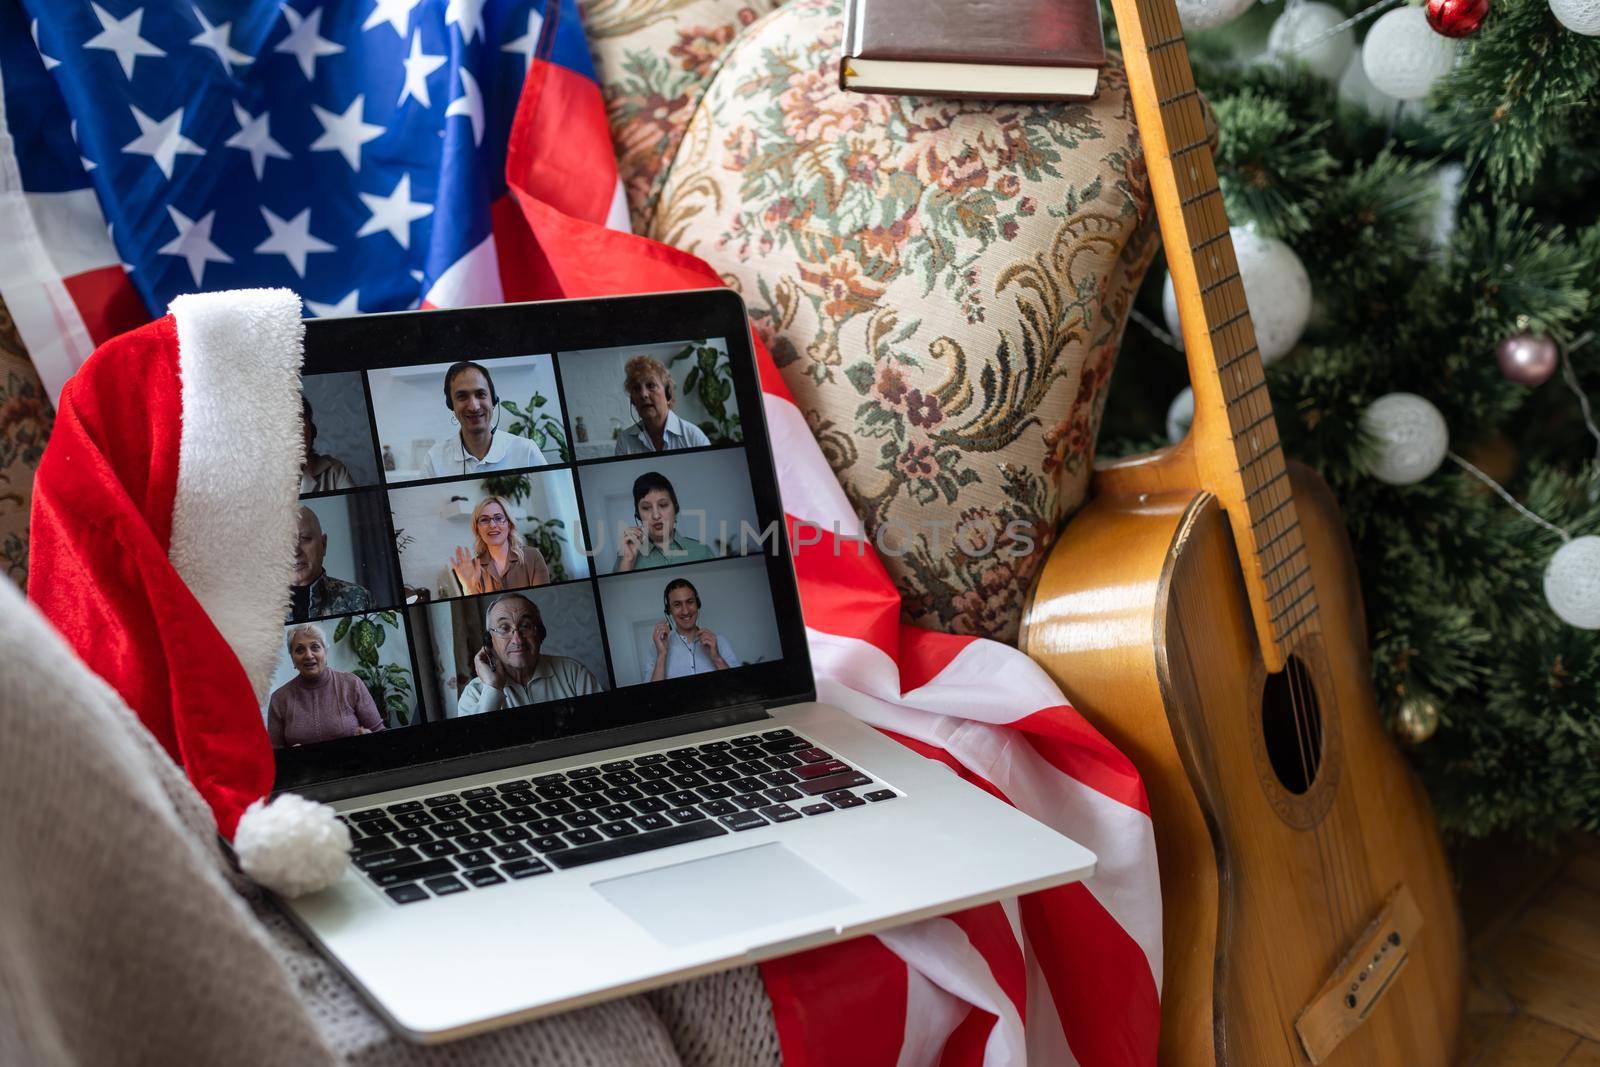 laptop with video chat at christmas and usa flag.